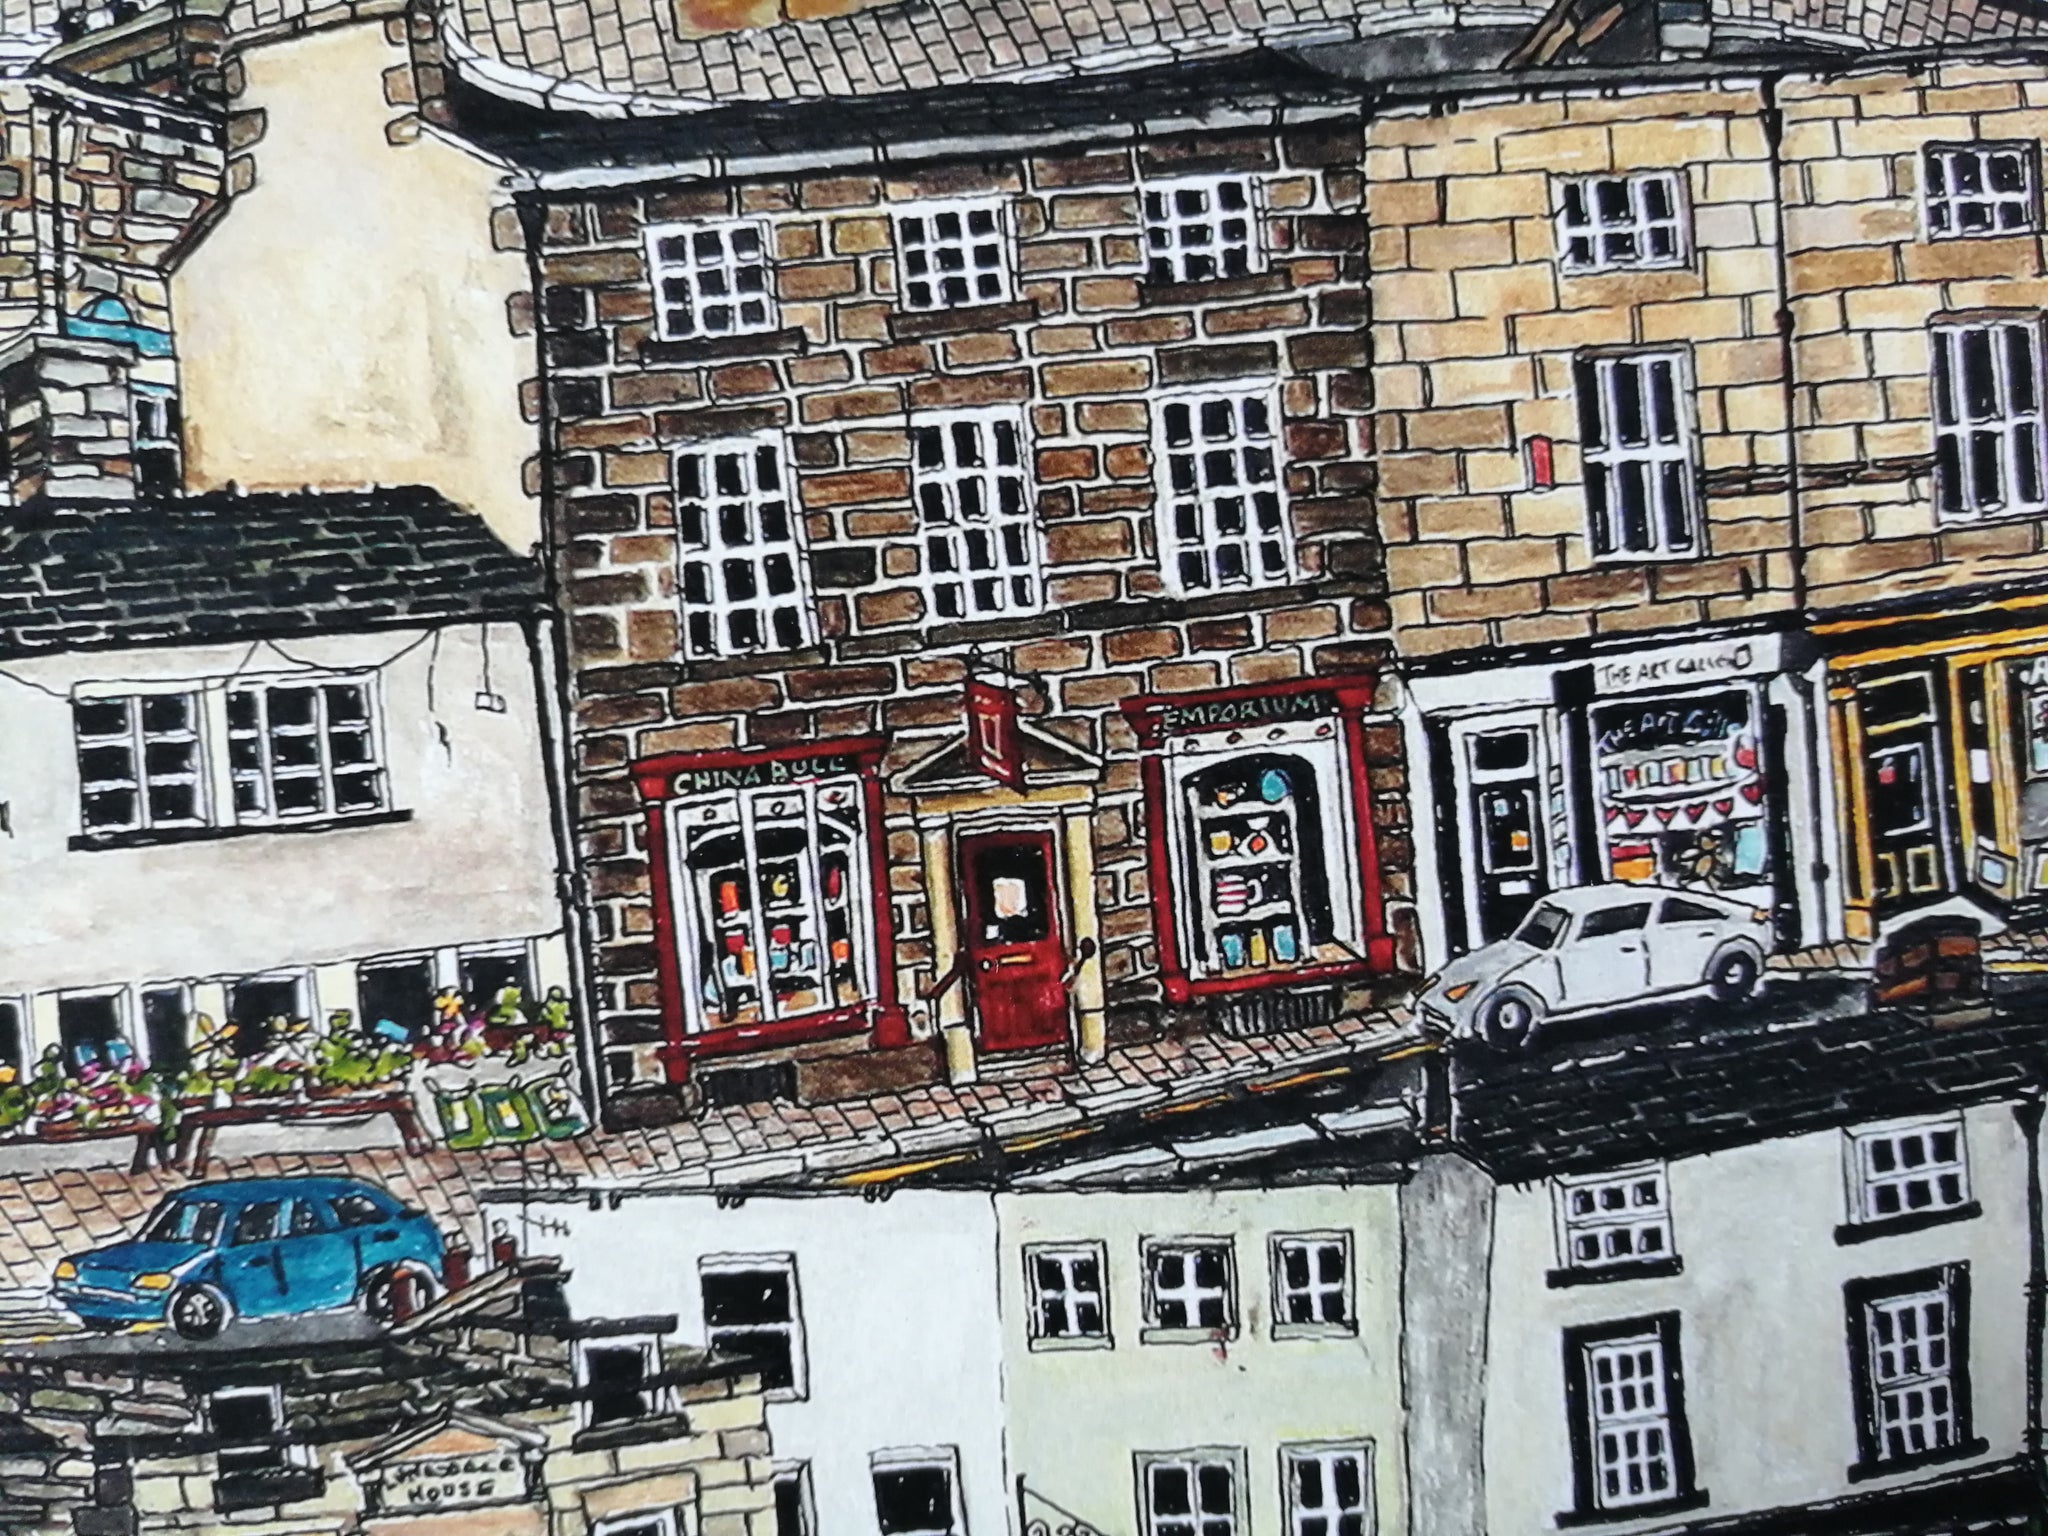 Kirkby Lonsdale - Townscape A3 297mm x 420mm. Printed on 300g acid free paper and dispatched in a sturdy tube by tracked delivery.